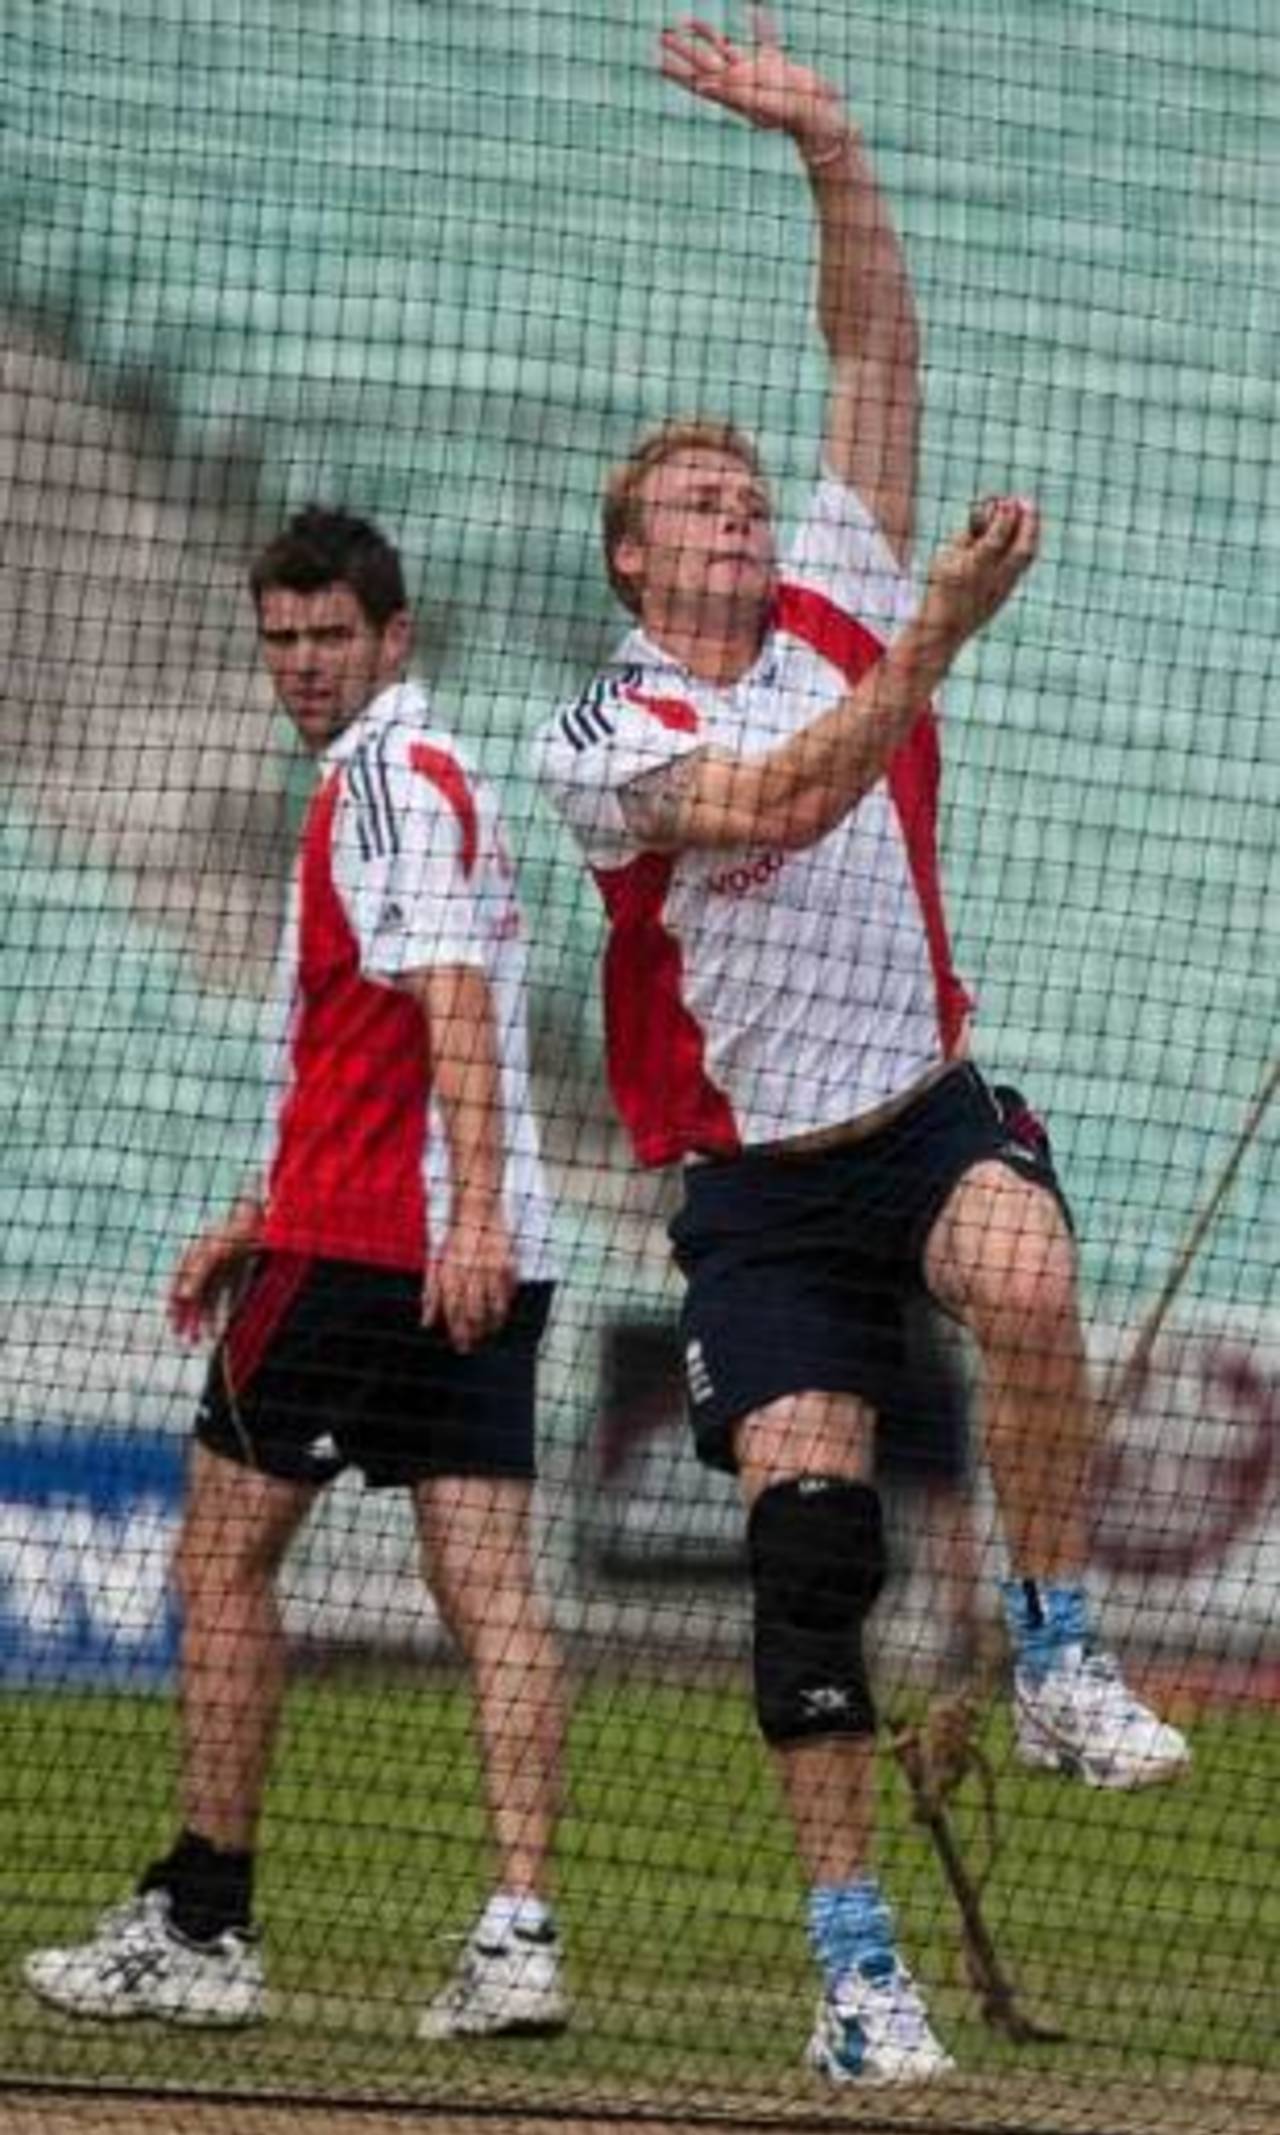 Andrew Flintoff goes through his pace during a net session, The Oval, August 18, 2009